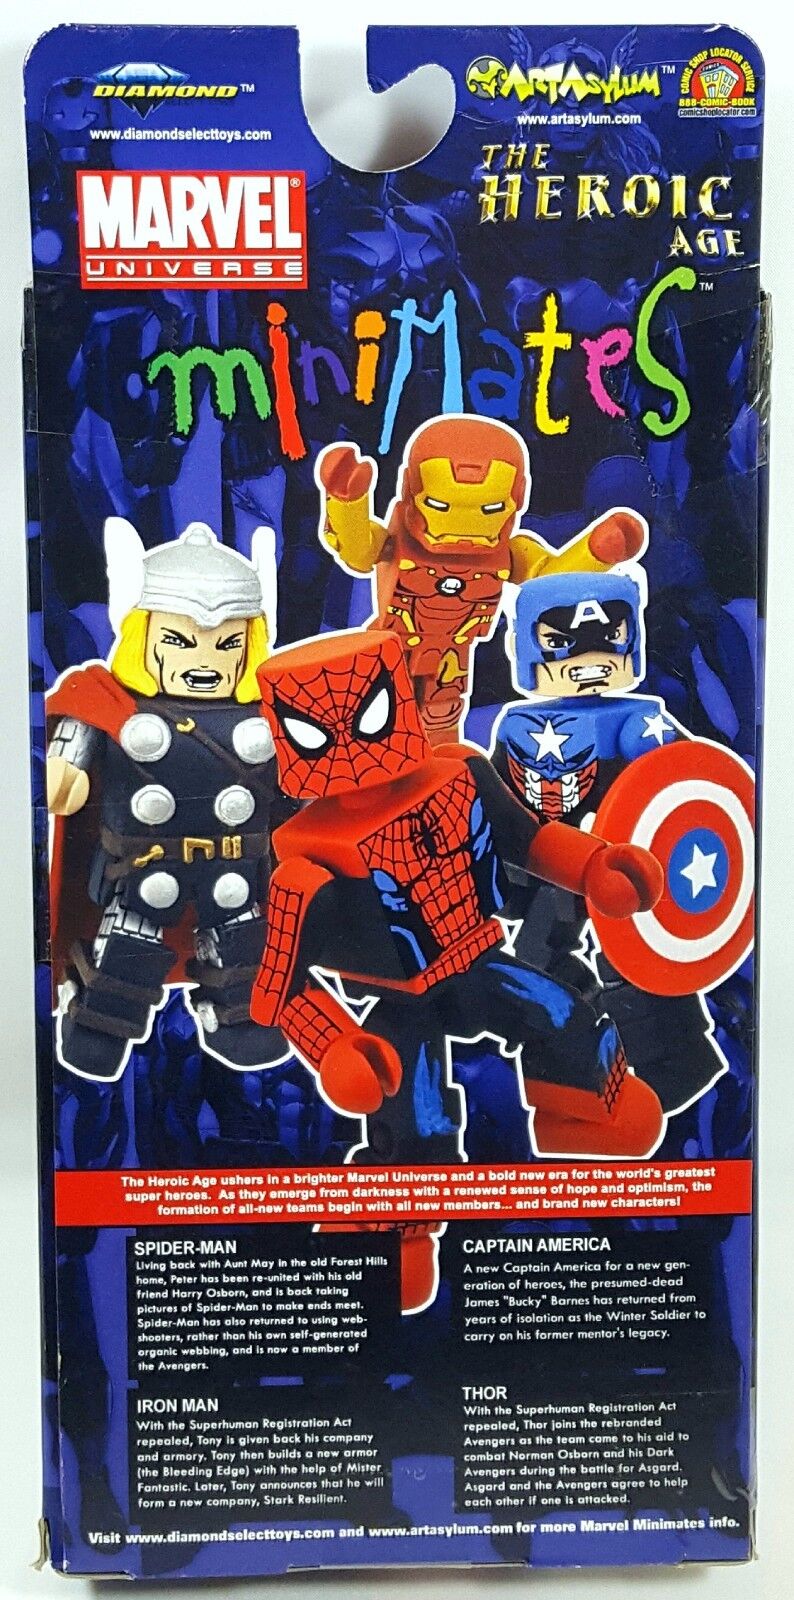 2010 MARVEL MINIMATES TOY R US THE HEROIC AGE 4-PACK 2" FIGURES MIP SPIDER-MAN